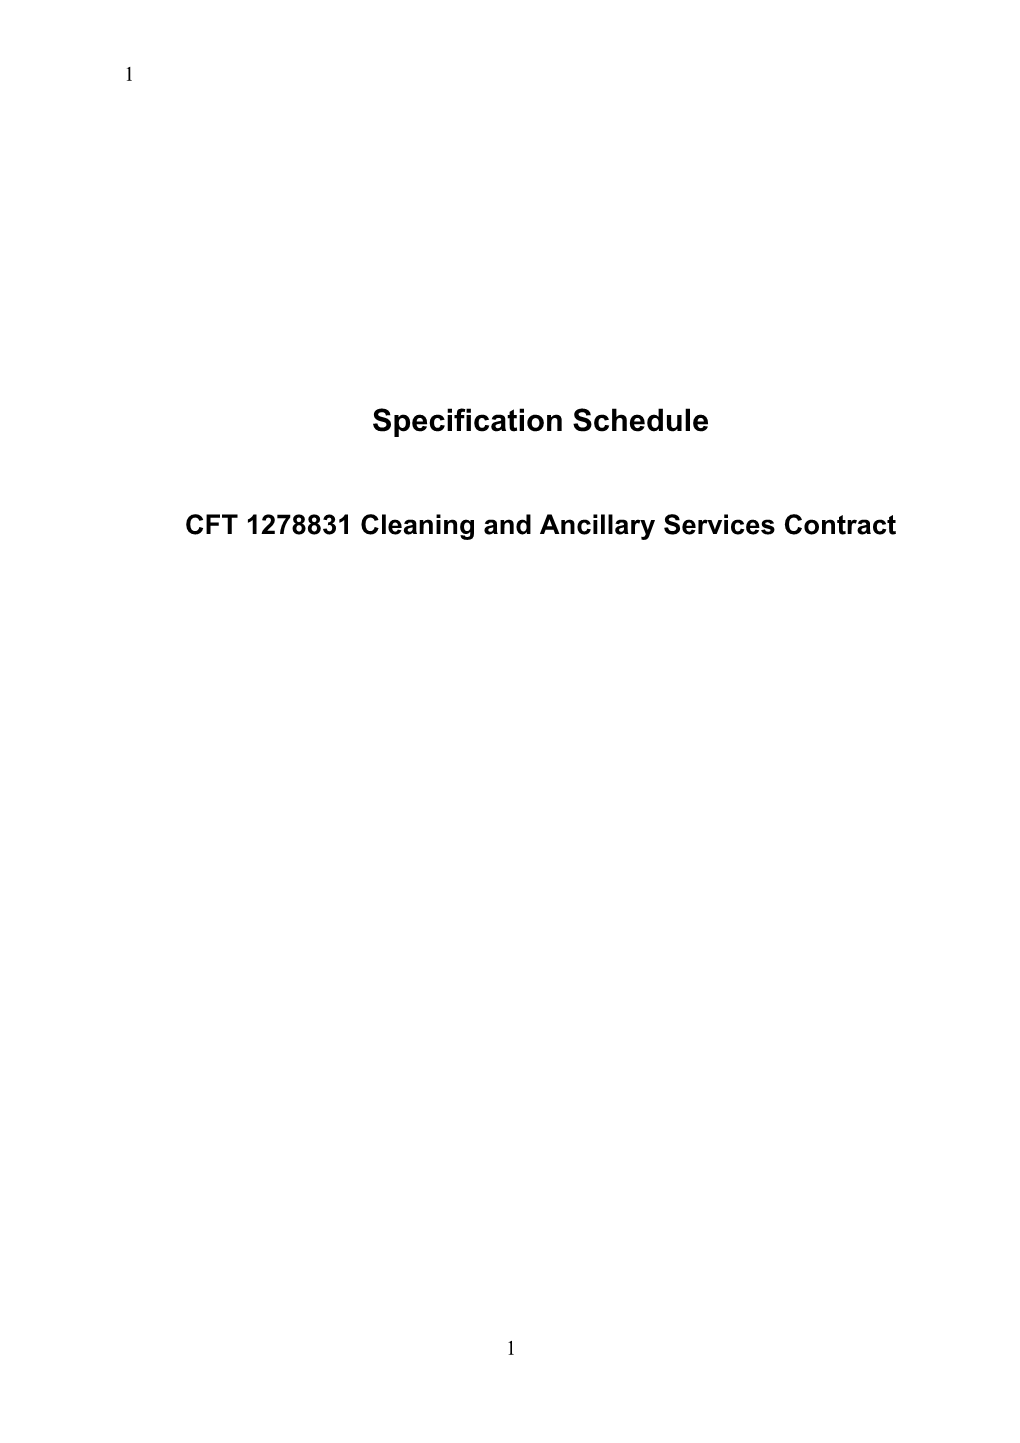 CFT 1278831 Cleaning and Ancillary Services Contract